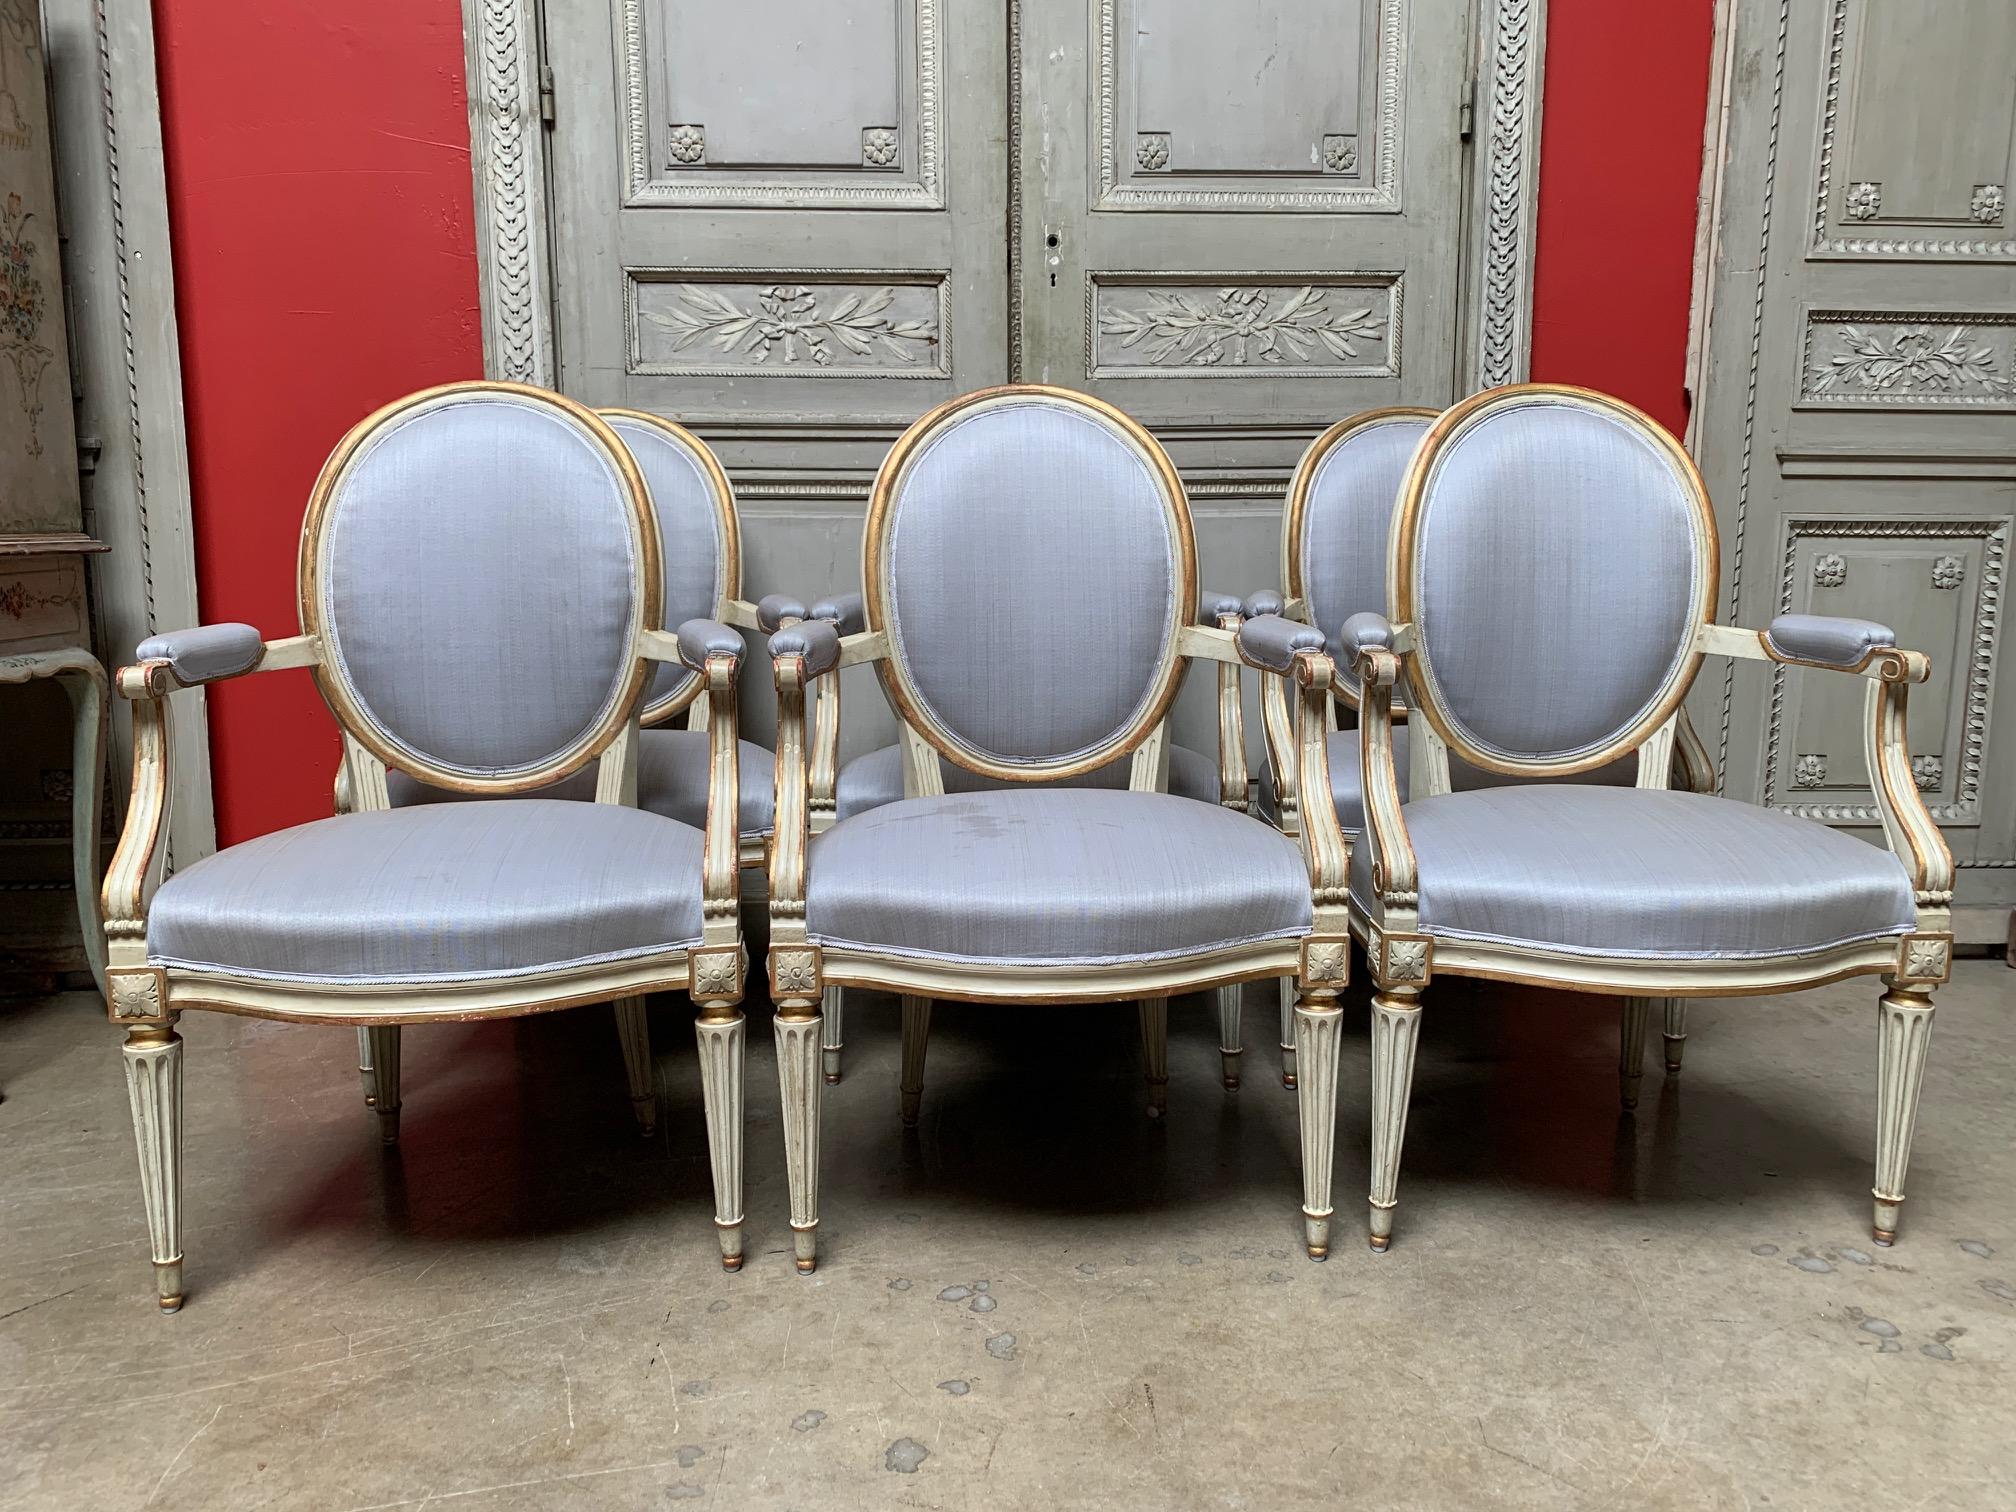 Six French Louis XVI pale gray painted and parcel-gilt dining armchairs from the late 18th century. These fauteuils are beautifully carved with oval backs and flutted legs. The painted and gilt fininsh is recently done, but the frames are of the